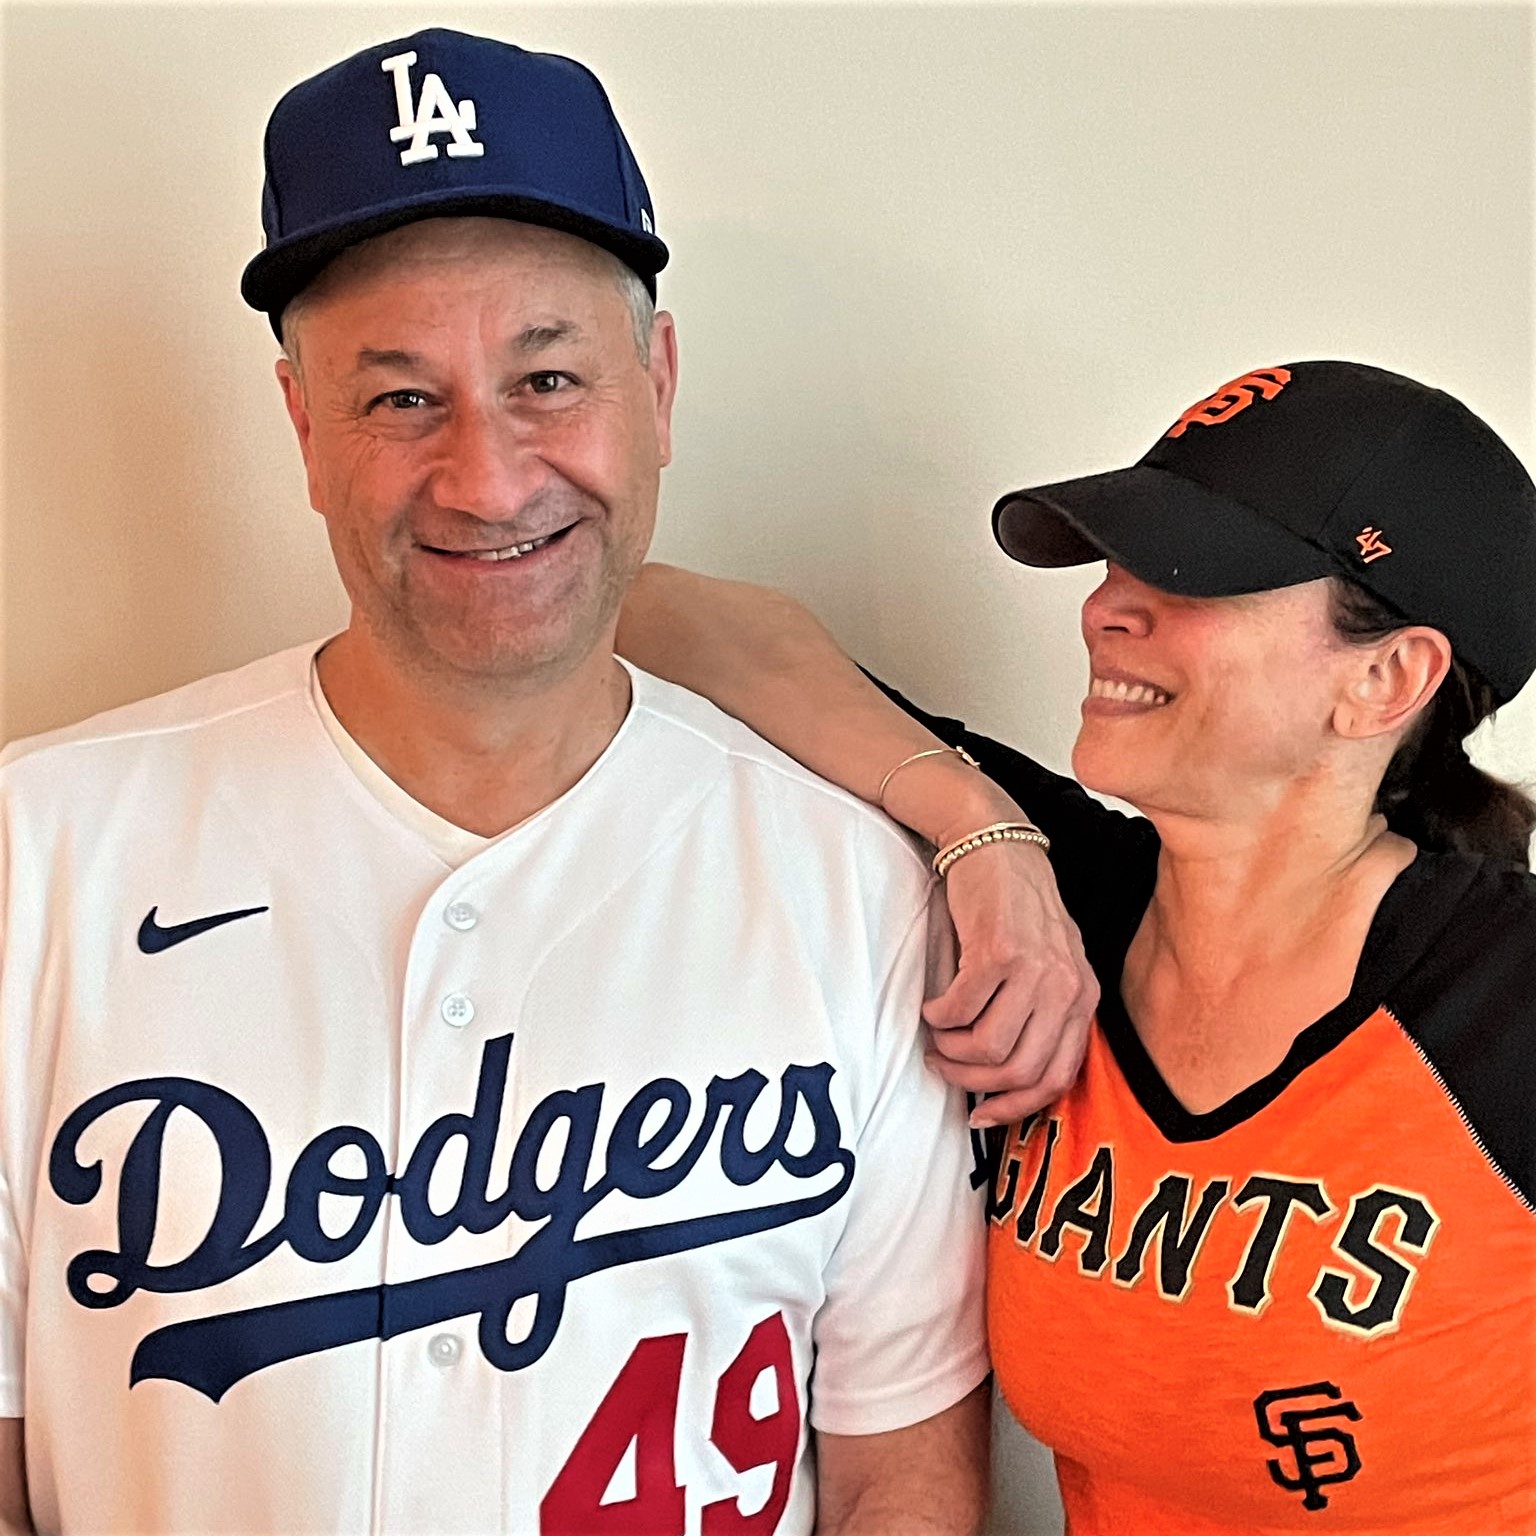 Dodgers or Giants? One thing VP Kamala Harris and her husband Douglas Emhoff don't agree on